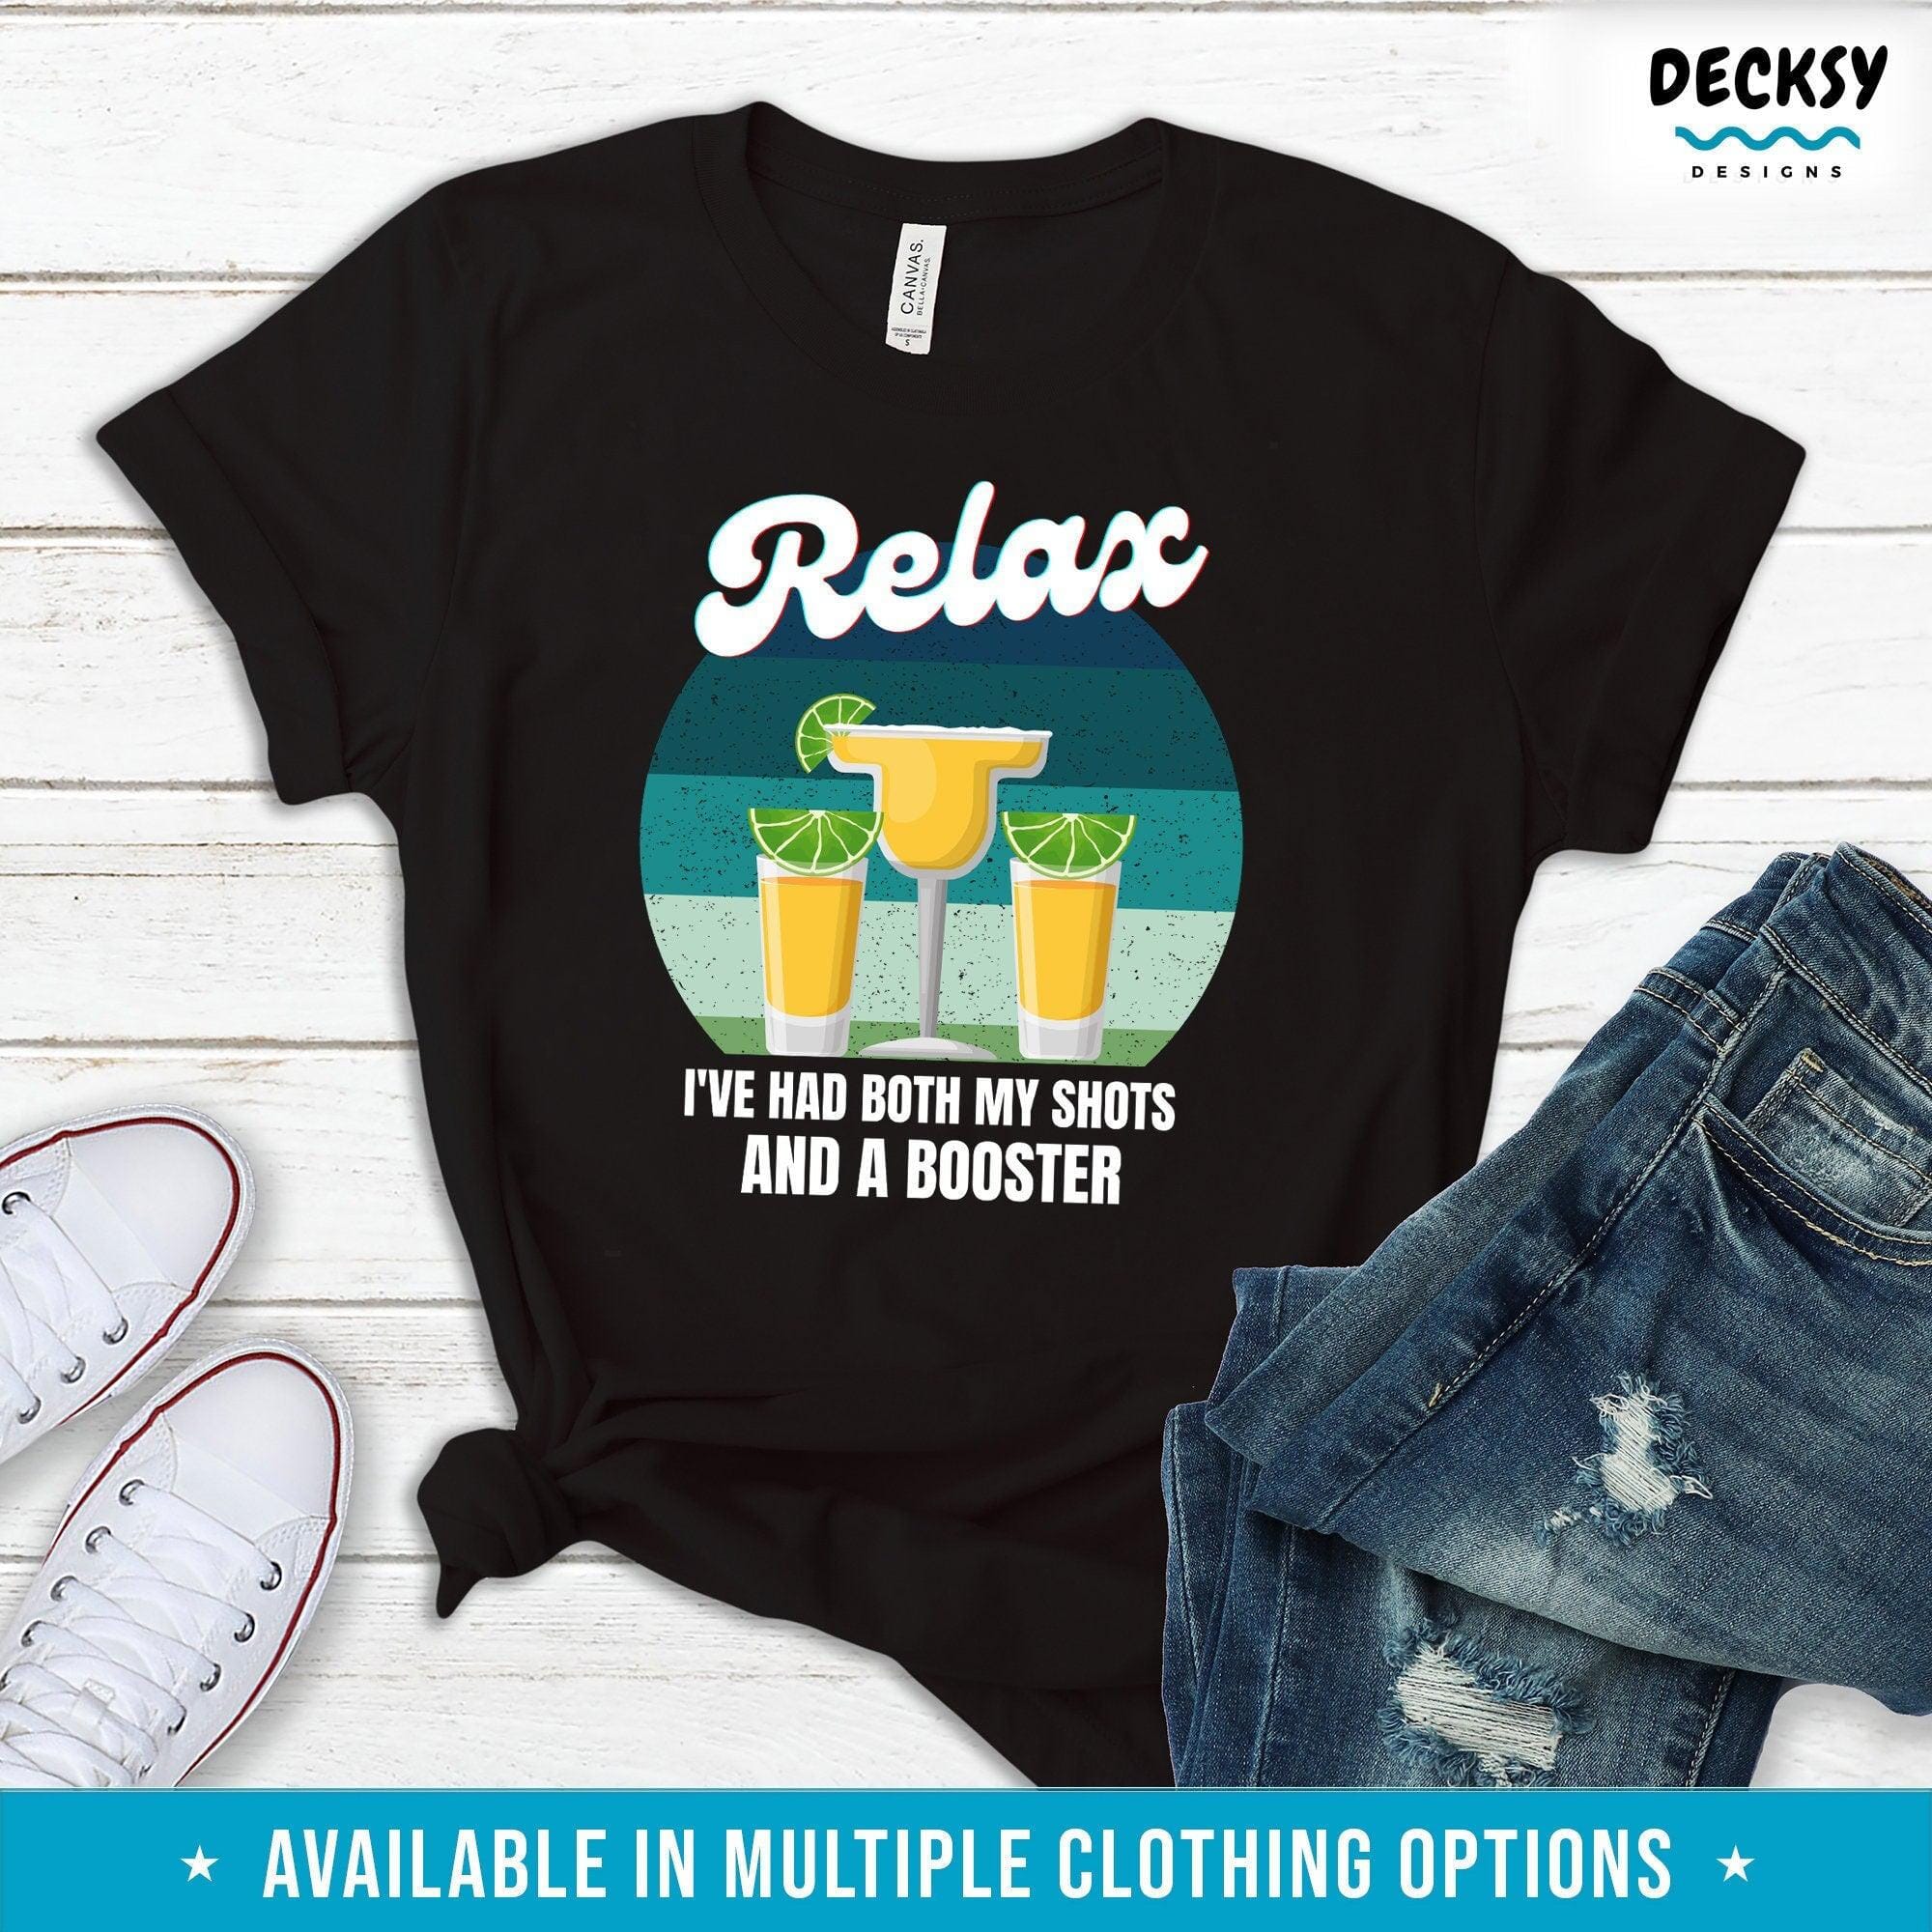 Booster Shot Shirt, Funny Vaccination Gift-Clothing:Gender-Neutral Adult Clothing:Tops & Tees:T-shirts:Graphic Tees-DecksyDesigns